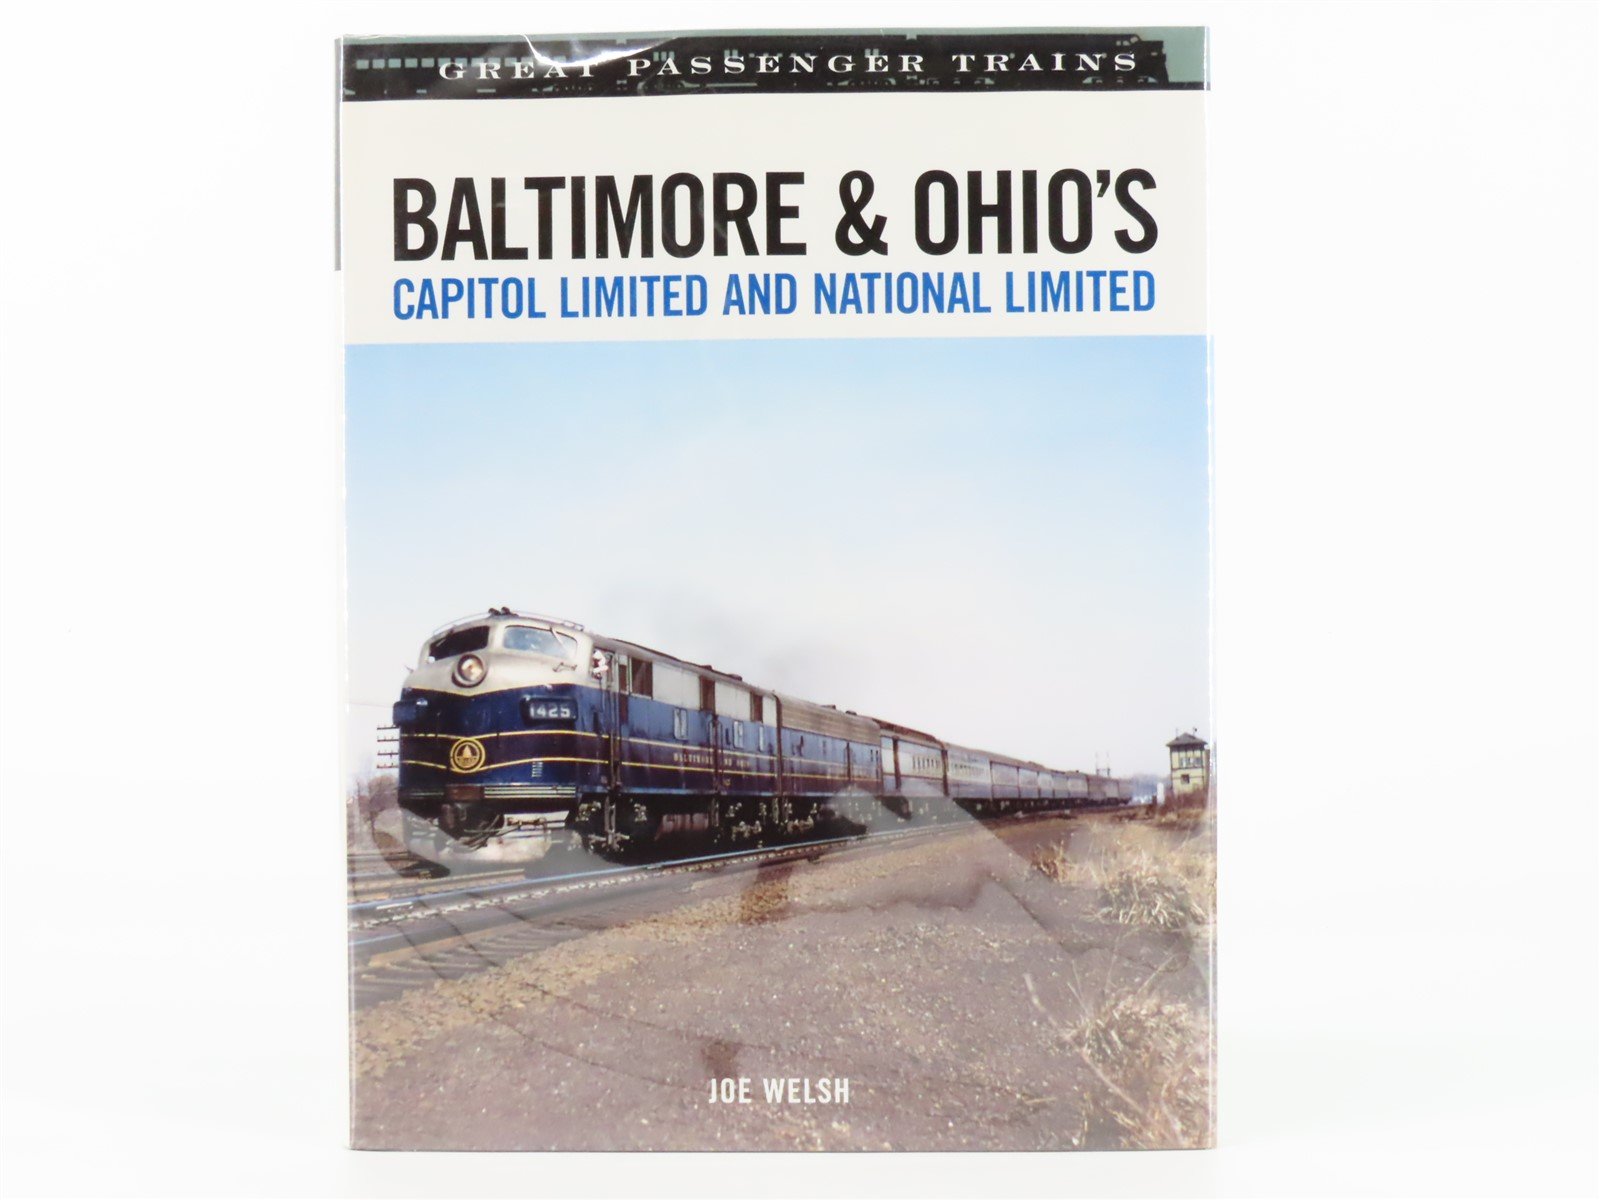 Great Passenger Trains: Baltimore & Ohio's Capitol Limited And National Limited